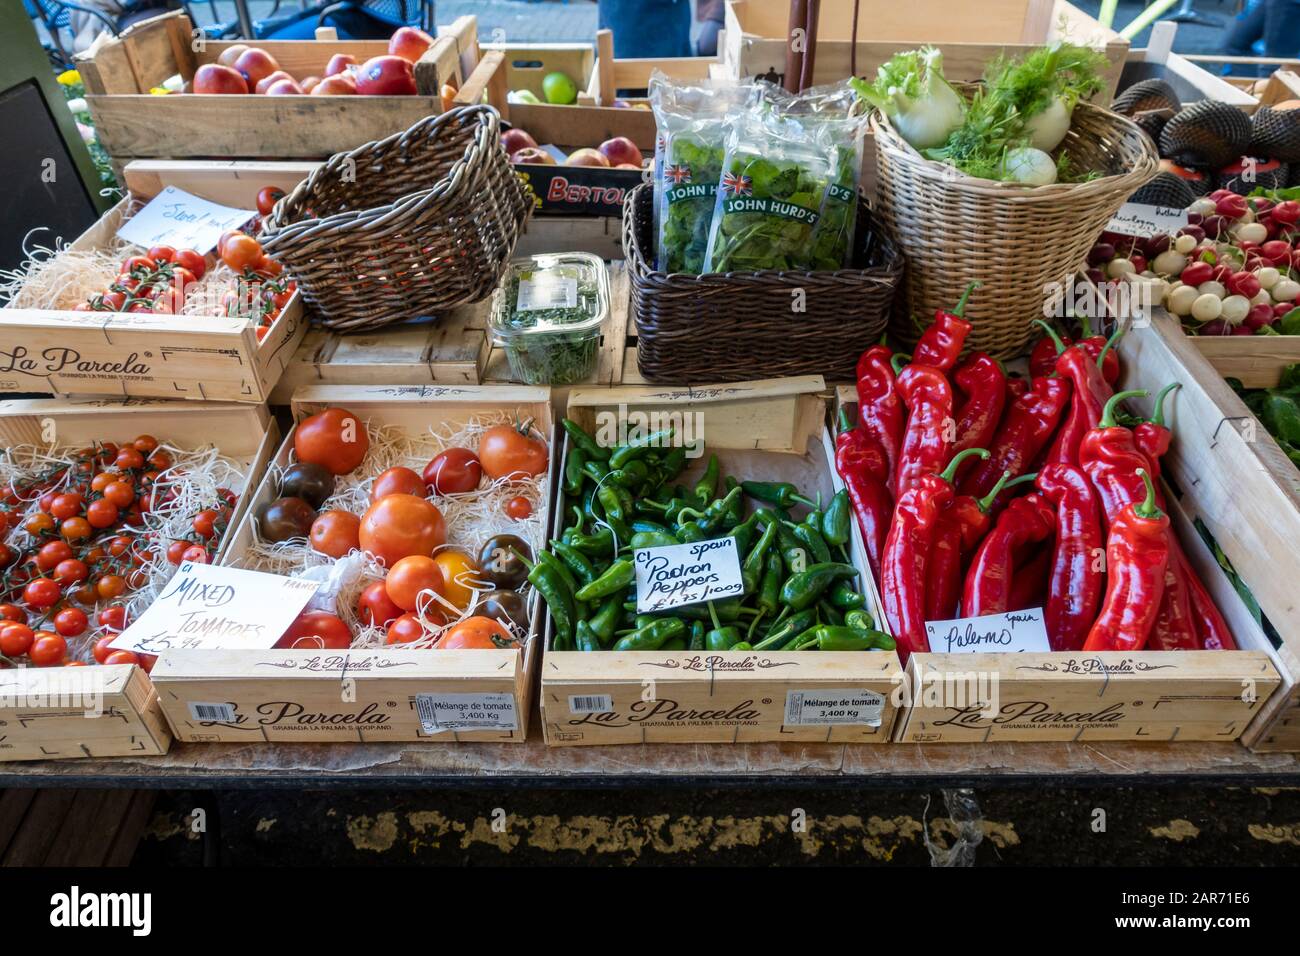 Close up of boxed vegetables for sale including Palermo Peppers, Padron Peppers and tomatoes at a grocer stall in Bristol, England, UK Stock Photo